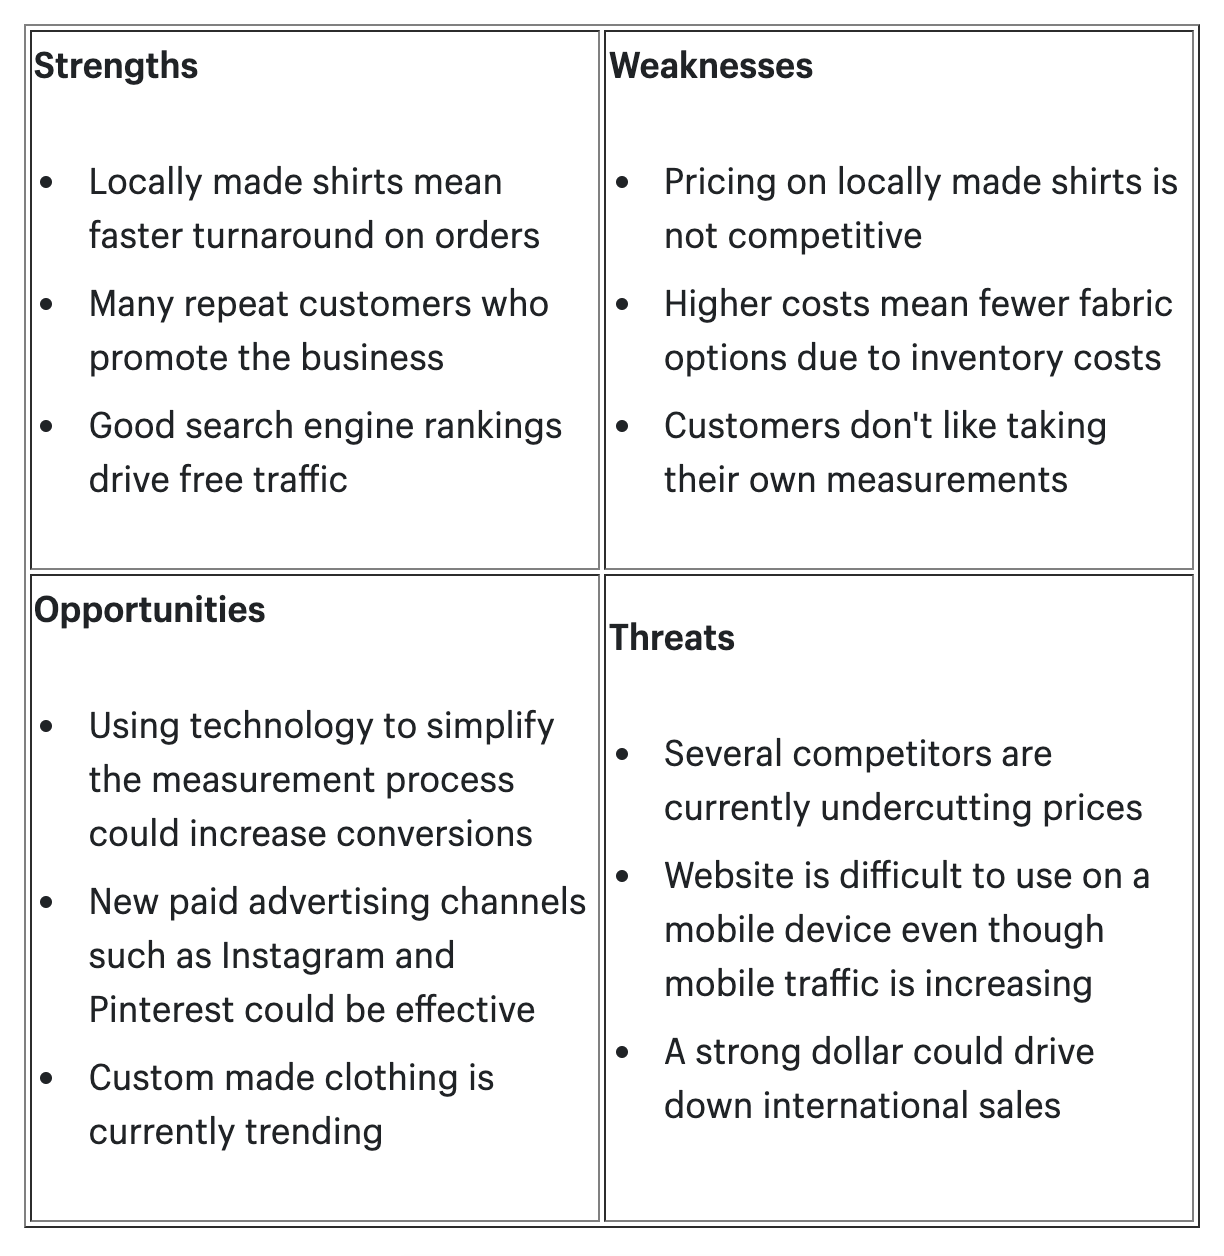 A SWOT analysis table showing strengths, weaknesses, opportunities and threats